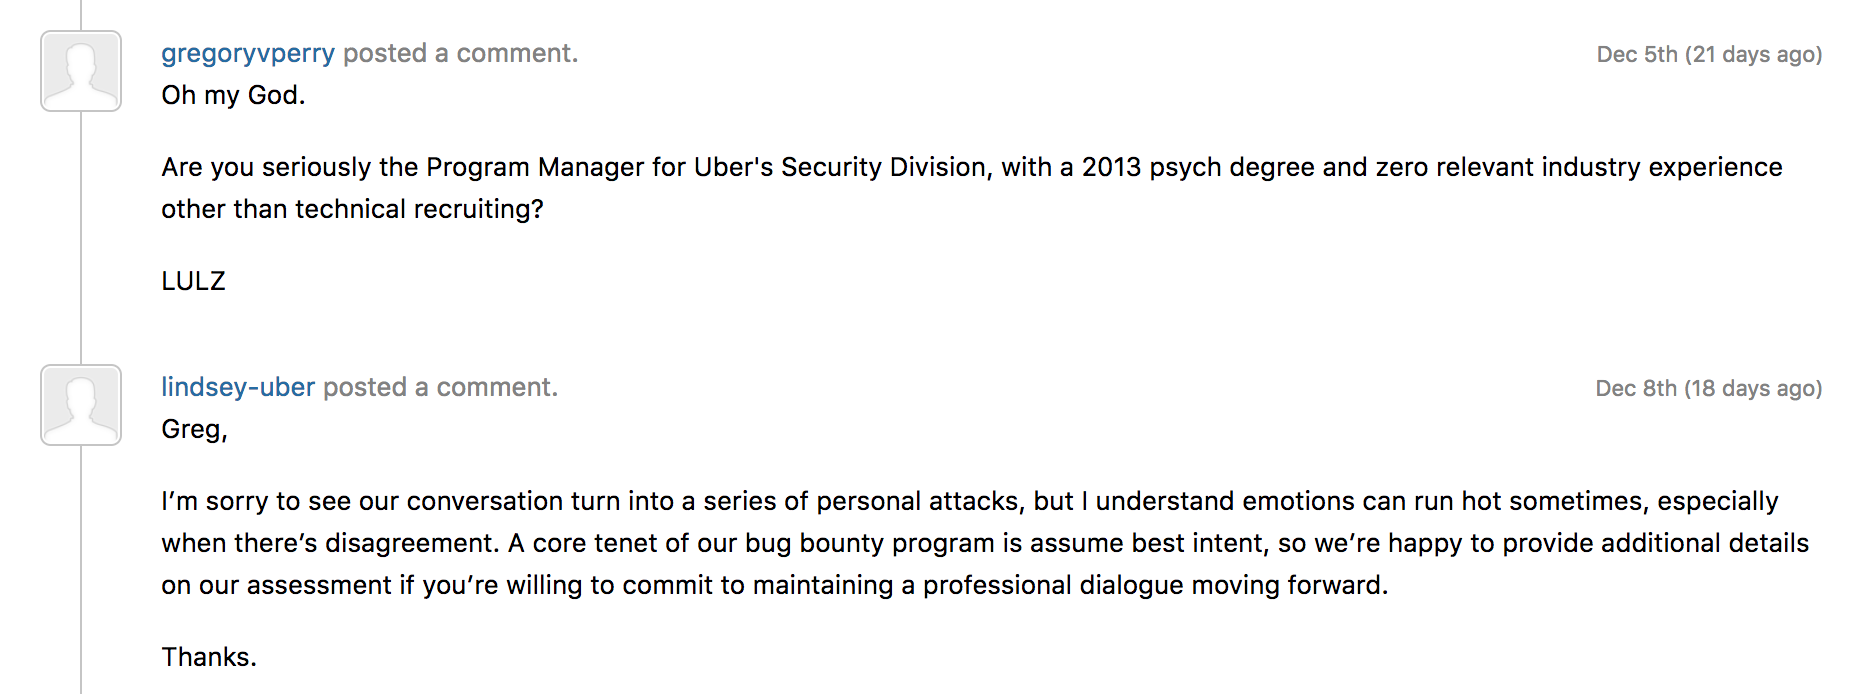 No One Looks Good In Uber’s Bug Bounty Fight